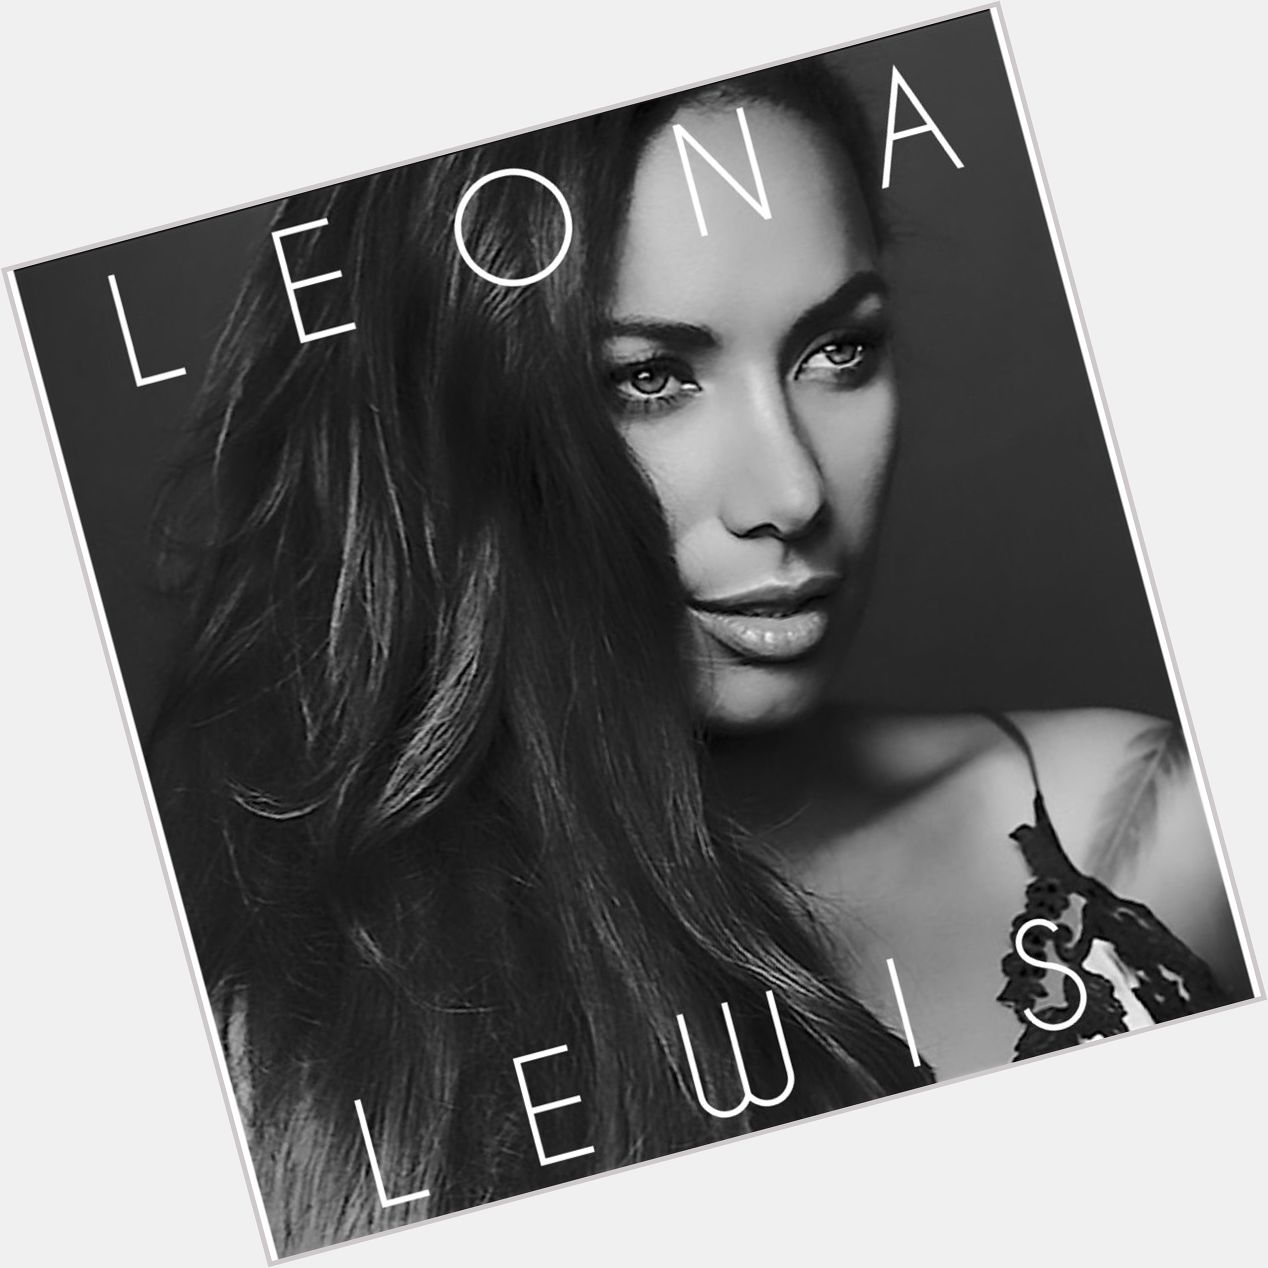  Happy  Birthday Leona Lewis! Hope you can give a concert soon in China.   